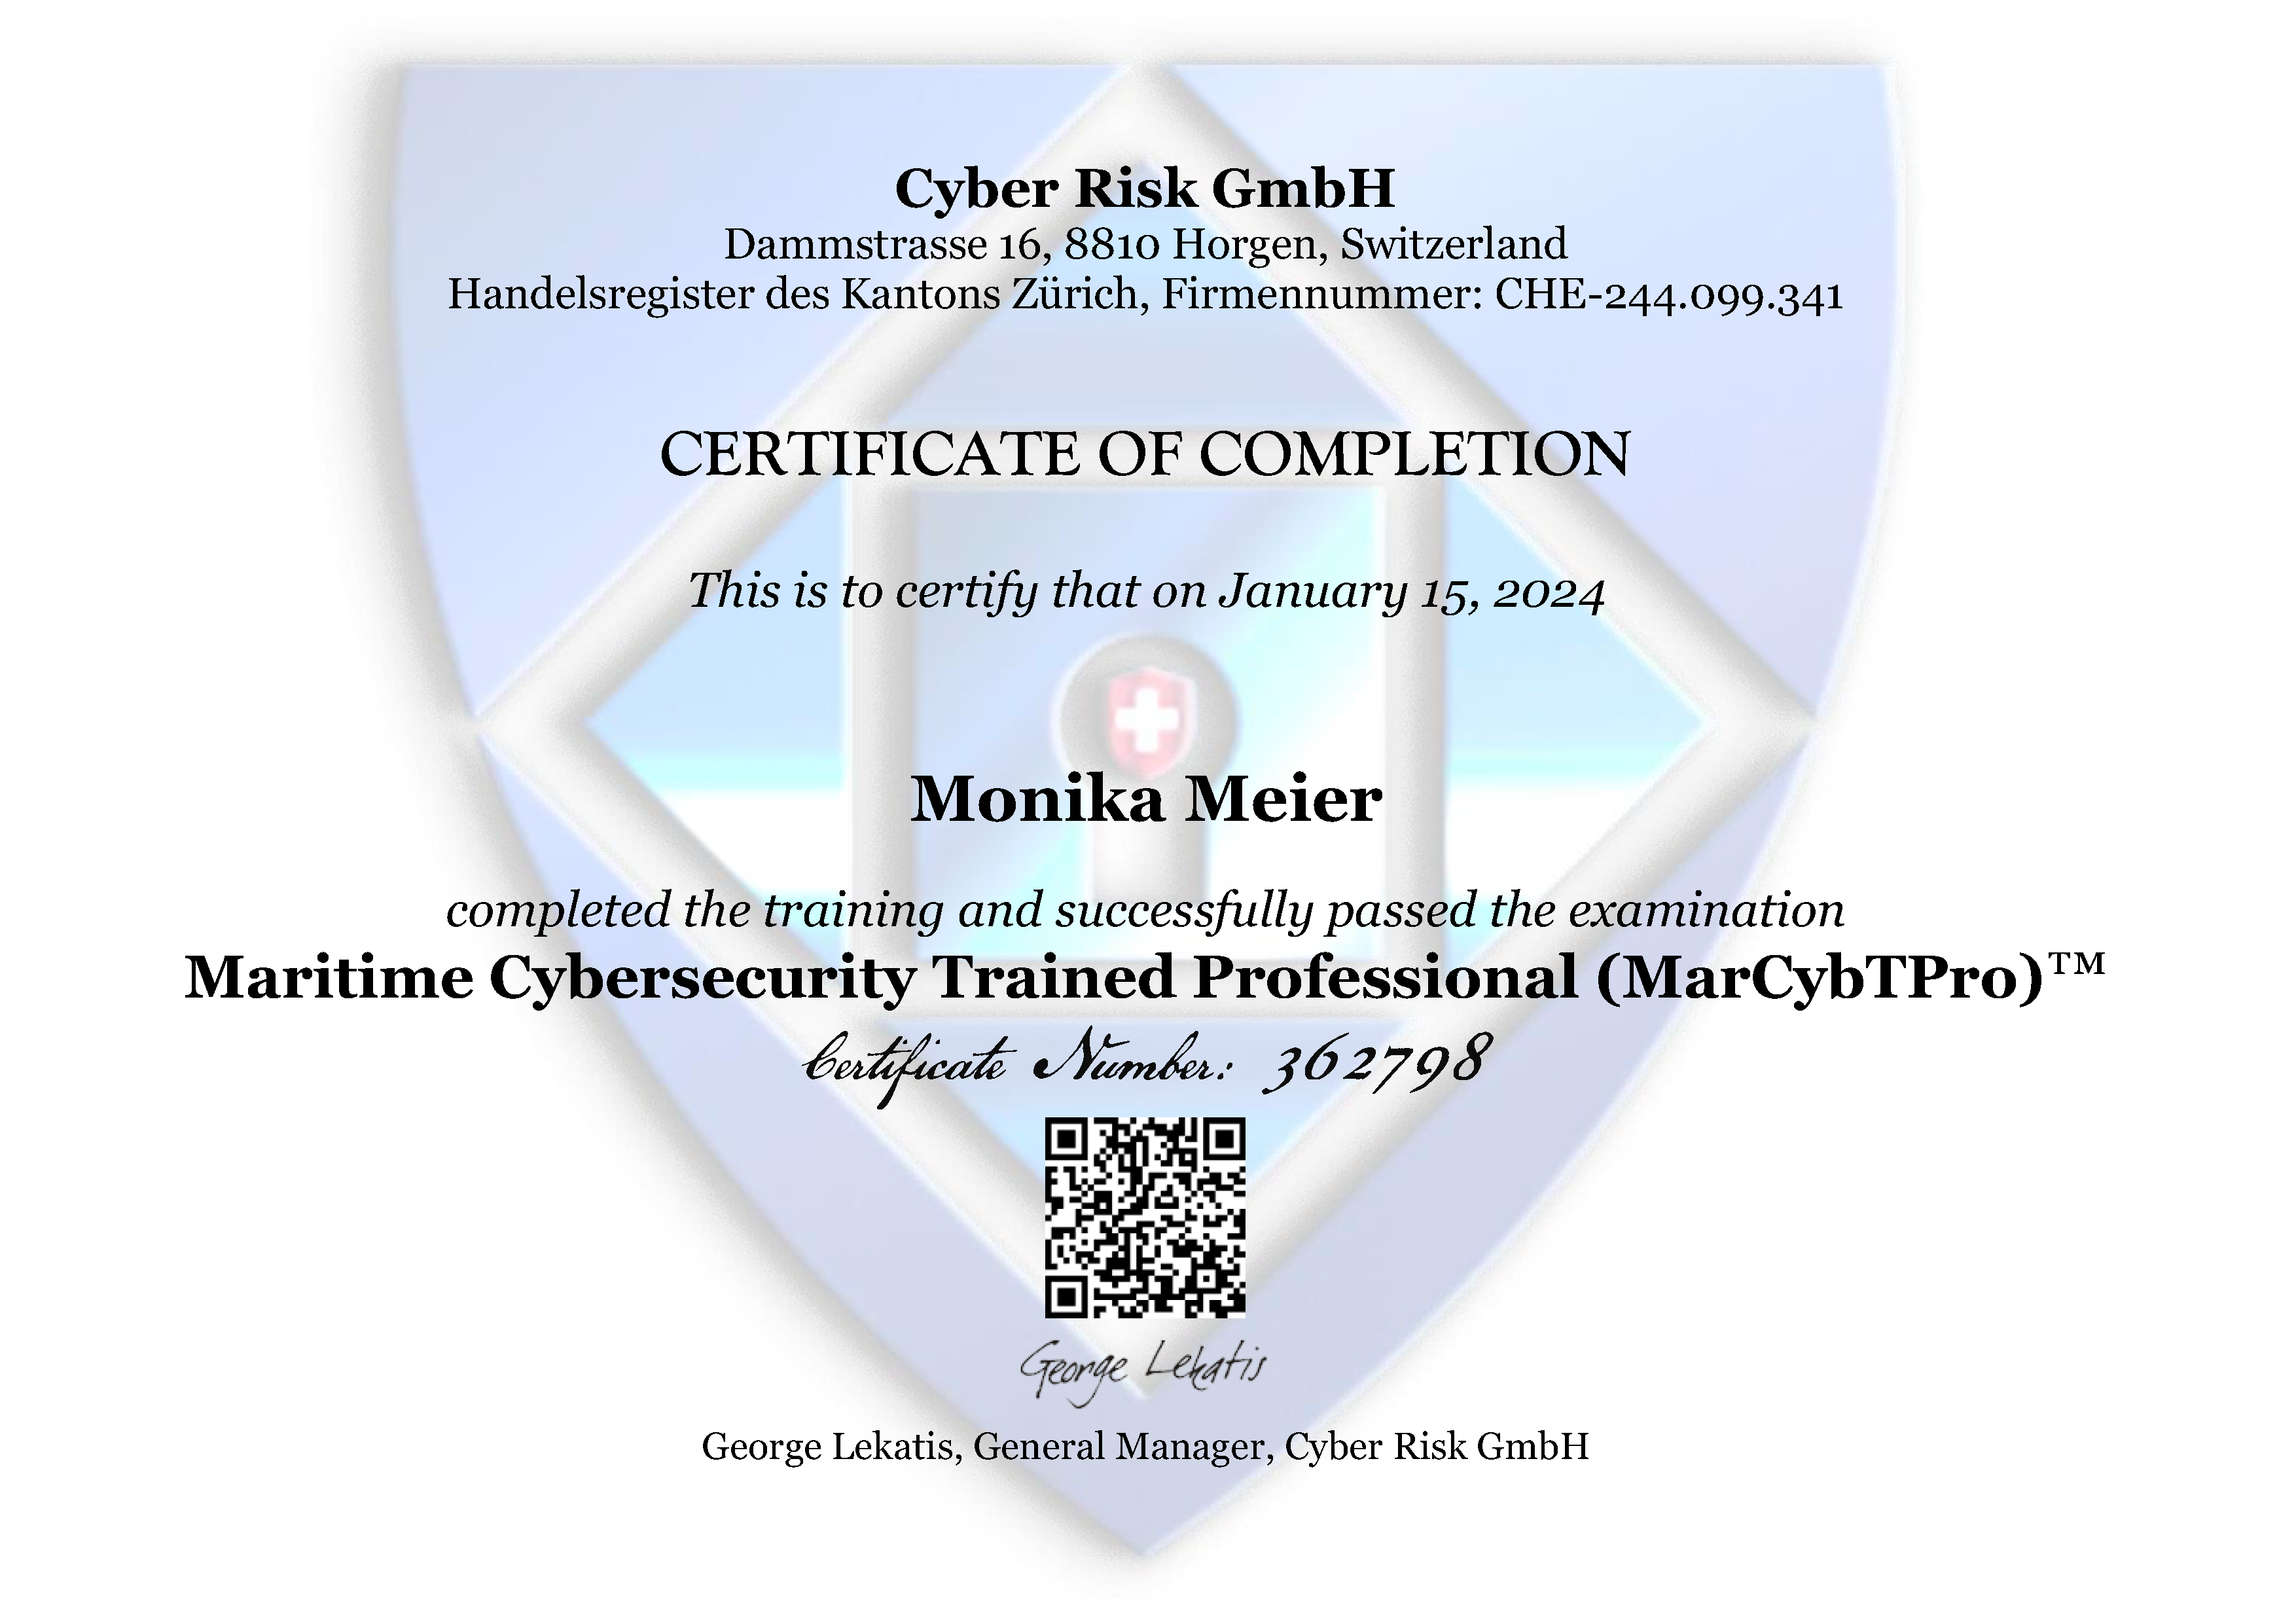 Maritime Cybersecurity Trained Professional (MarCybTPro)